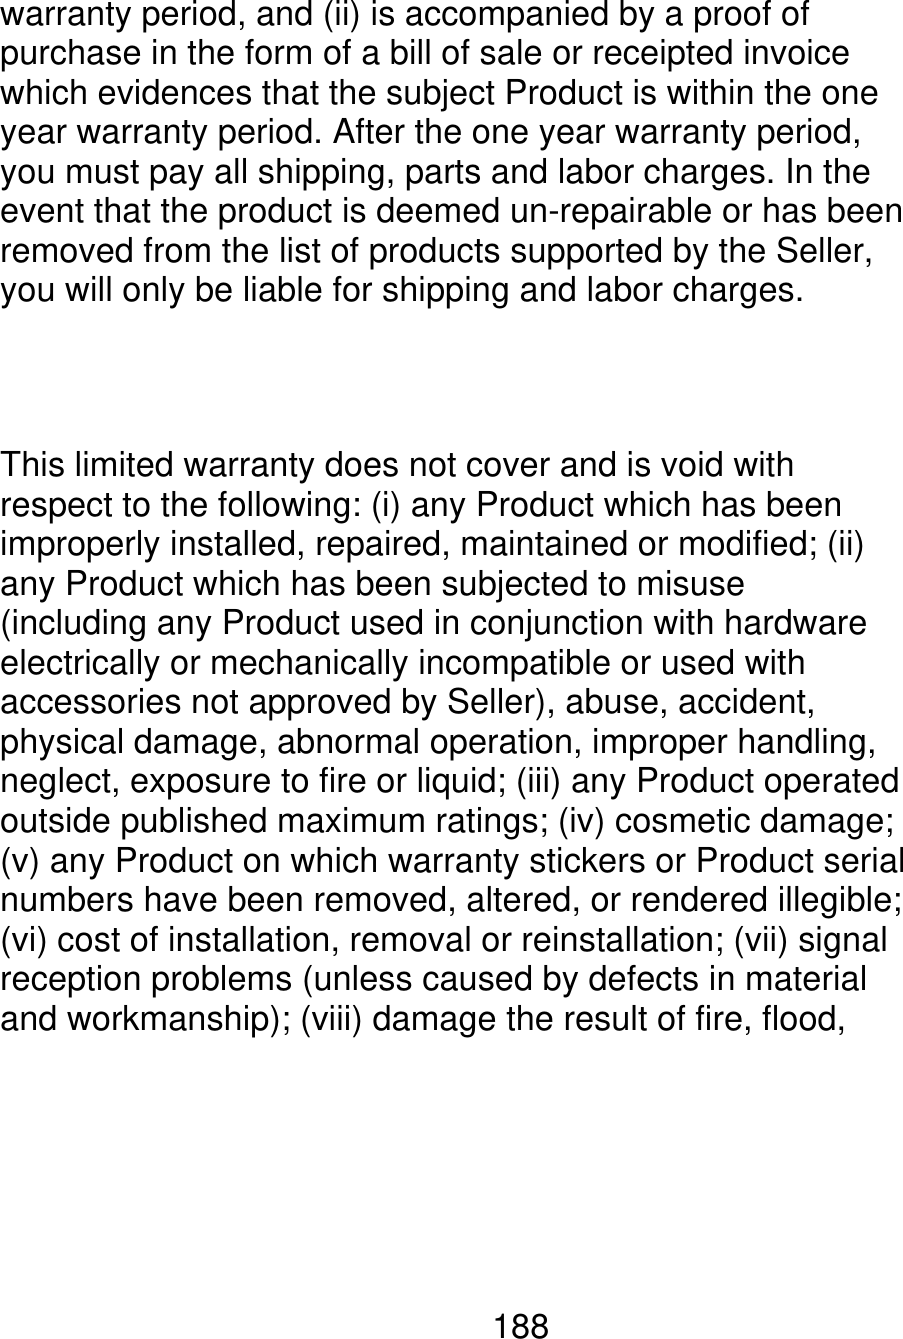 warranty period, and (ii) is accompanied by a proof of purchase in the form of a bill of sale or receipted invoice which evidences that the subject Product is within the one year warranty period. After the one year warranty period, you must pay all shipping, parts and labor charges. In the event that the product is deemed un-repairable or has been removed from the list of products supported by the Seller, you will only be liable for shipping and labor charges. This limited warranty does not cover and is void with respect to the following: (i) any Product which has been improperly installed, repaired, maintained or modified; (ii) any Product which has been subjected to misuse (including any Product used in conjunction with hardware electrically or mechanically incompatible or used with accessories not approved by Seller), abuse, accident, physical damage, abnormal operation, improper handling, neglect, exposure to fire or liquid; (iii) any Product operated outside published maximum ratings; (iv) cosmetic damage; (v) any Product on which warranty stickers or Product serial numbers have been removed, altered, or rendered illegible; (vi) cost of installation, removal or reinstallation; (vii) signal reception problems (unless caused by defects in material and workmanship); (viii) damage the result of fire, flood, 188 